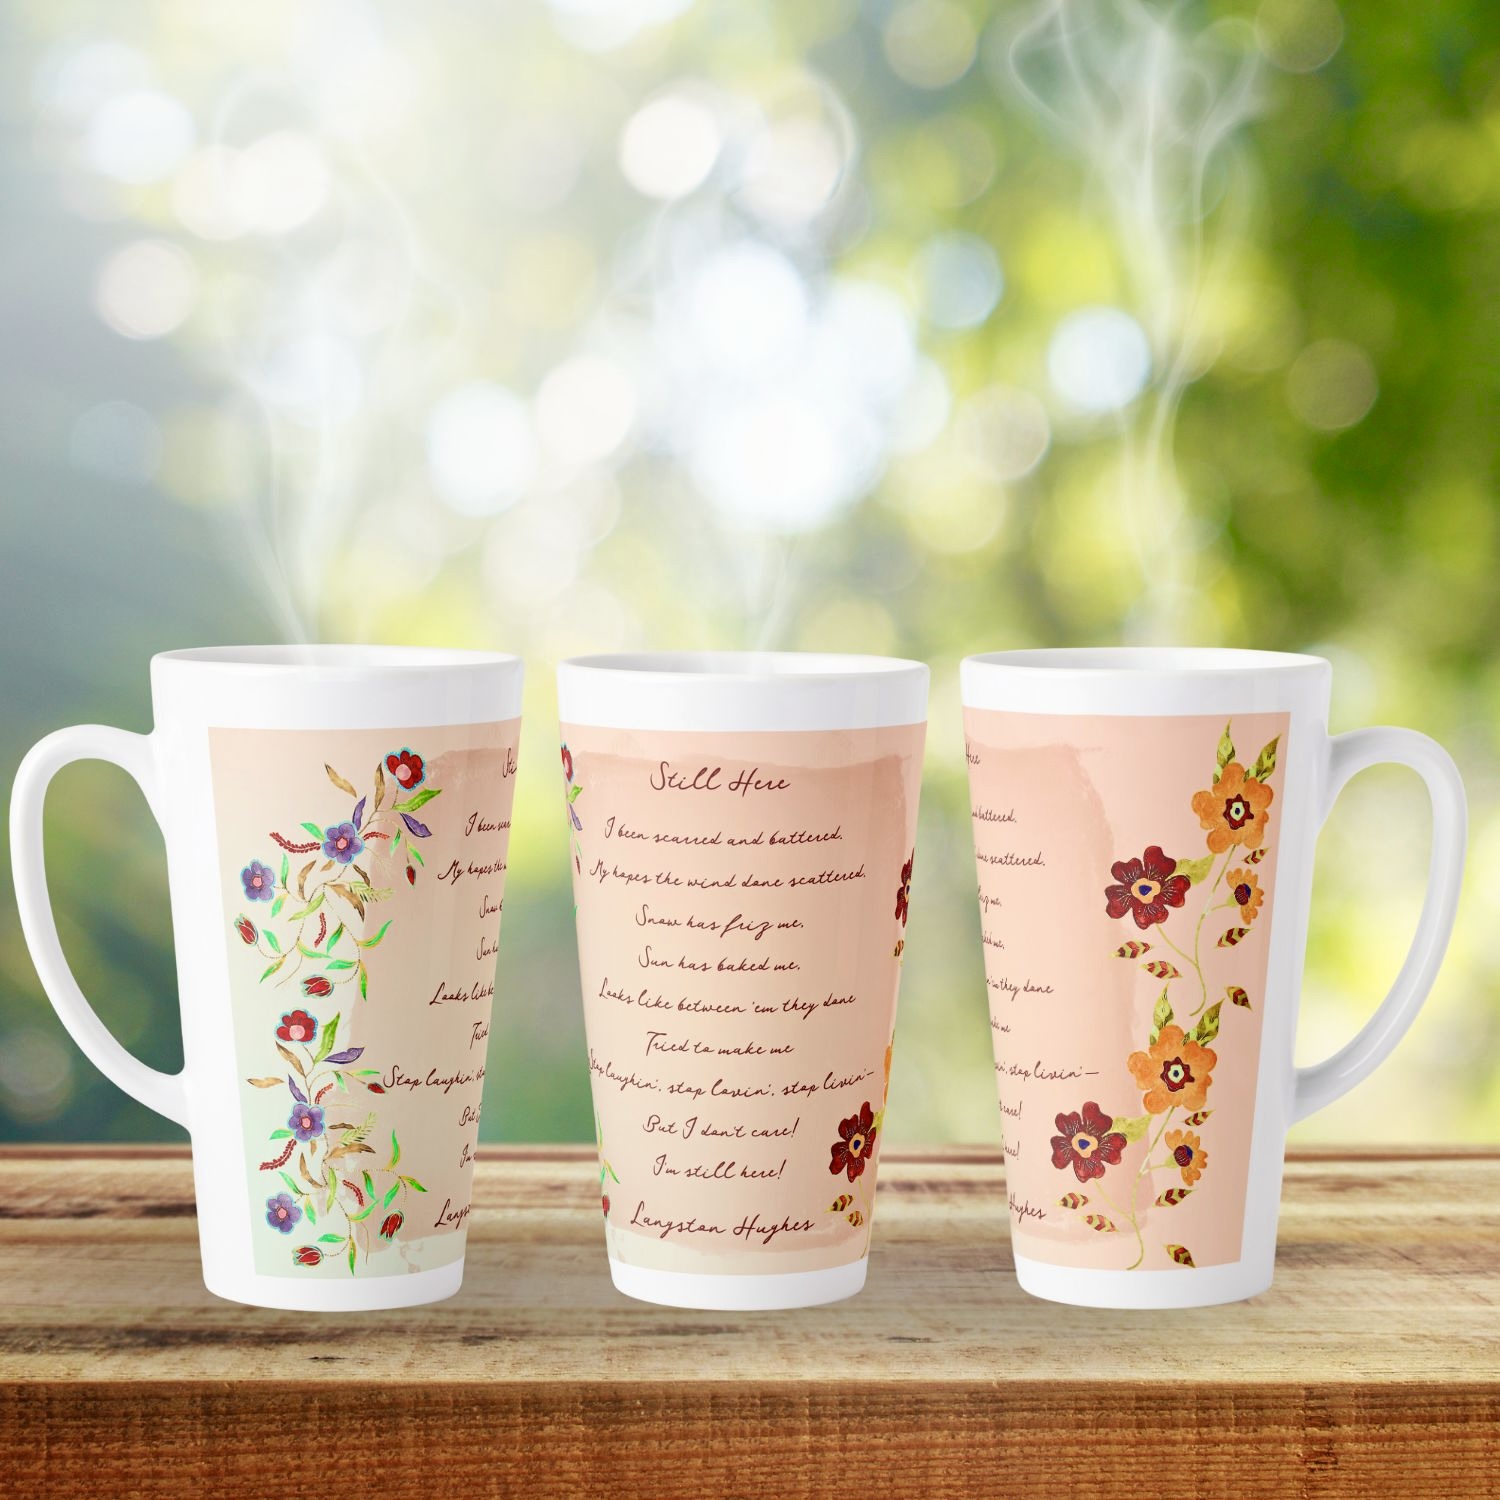 Coffee latte mug featuring a serene design inspired by delicate watercolor flowers and a coral-toned mandala, evoking elegance and tranquility. A subtle touch of literary inspiration with Langston Hughes' poem 'Still Here' adds depth to the design, inviting contemplation while enjoying your favorite hot beverage.